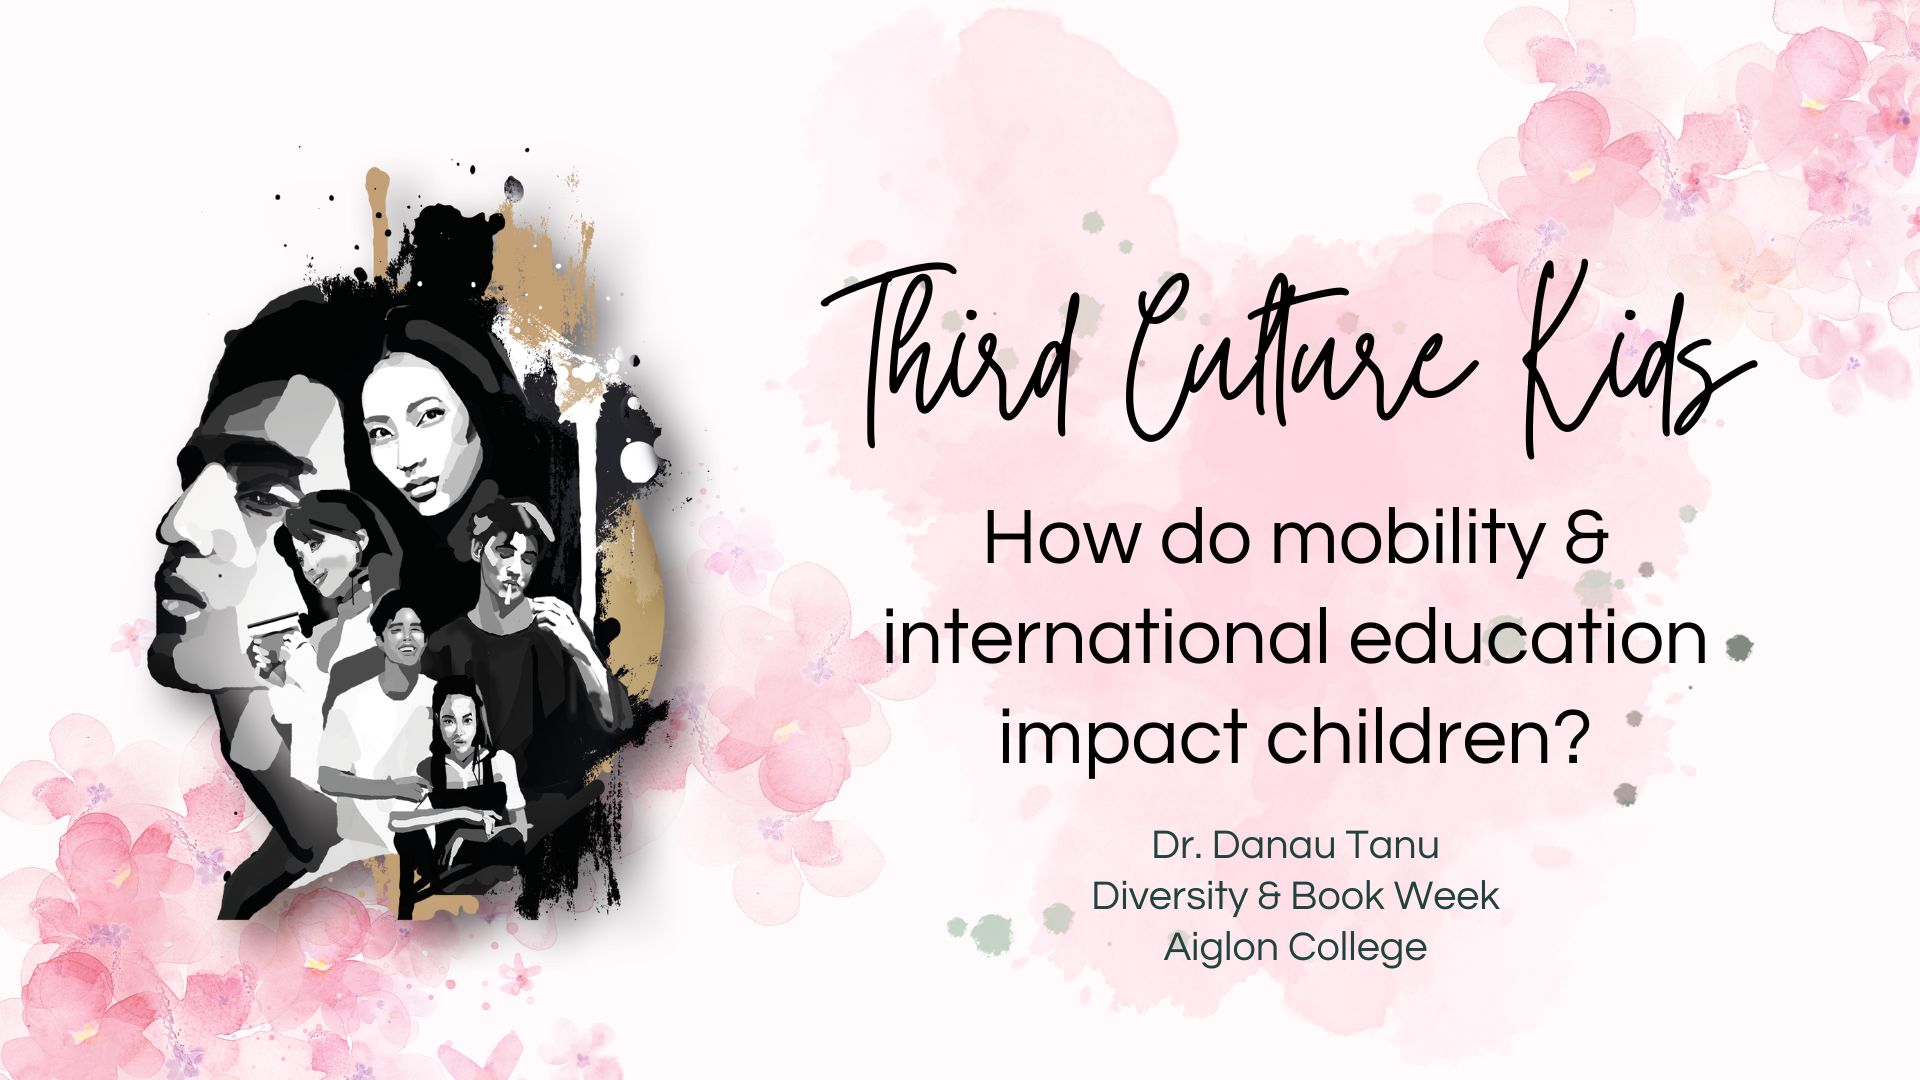 Third Culture Kids - How do mobility and international education impact children